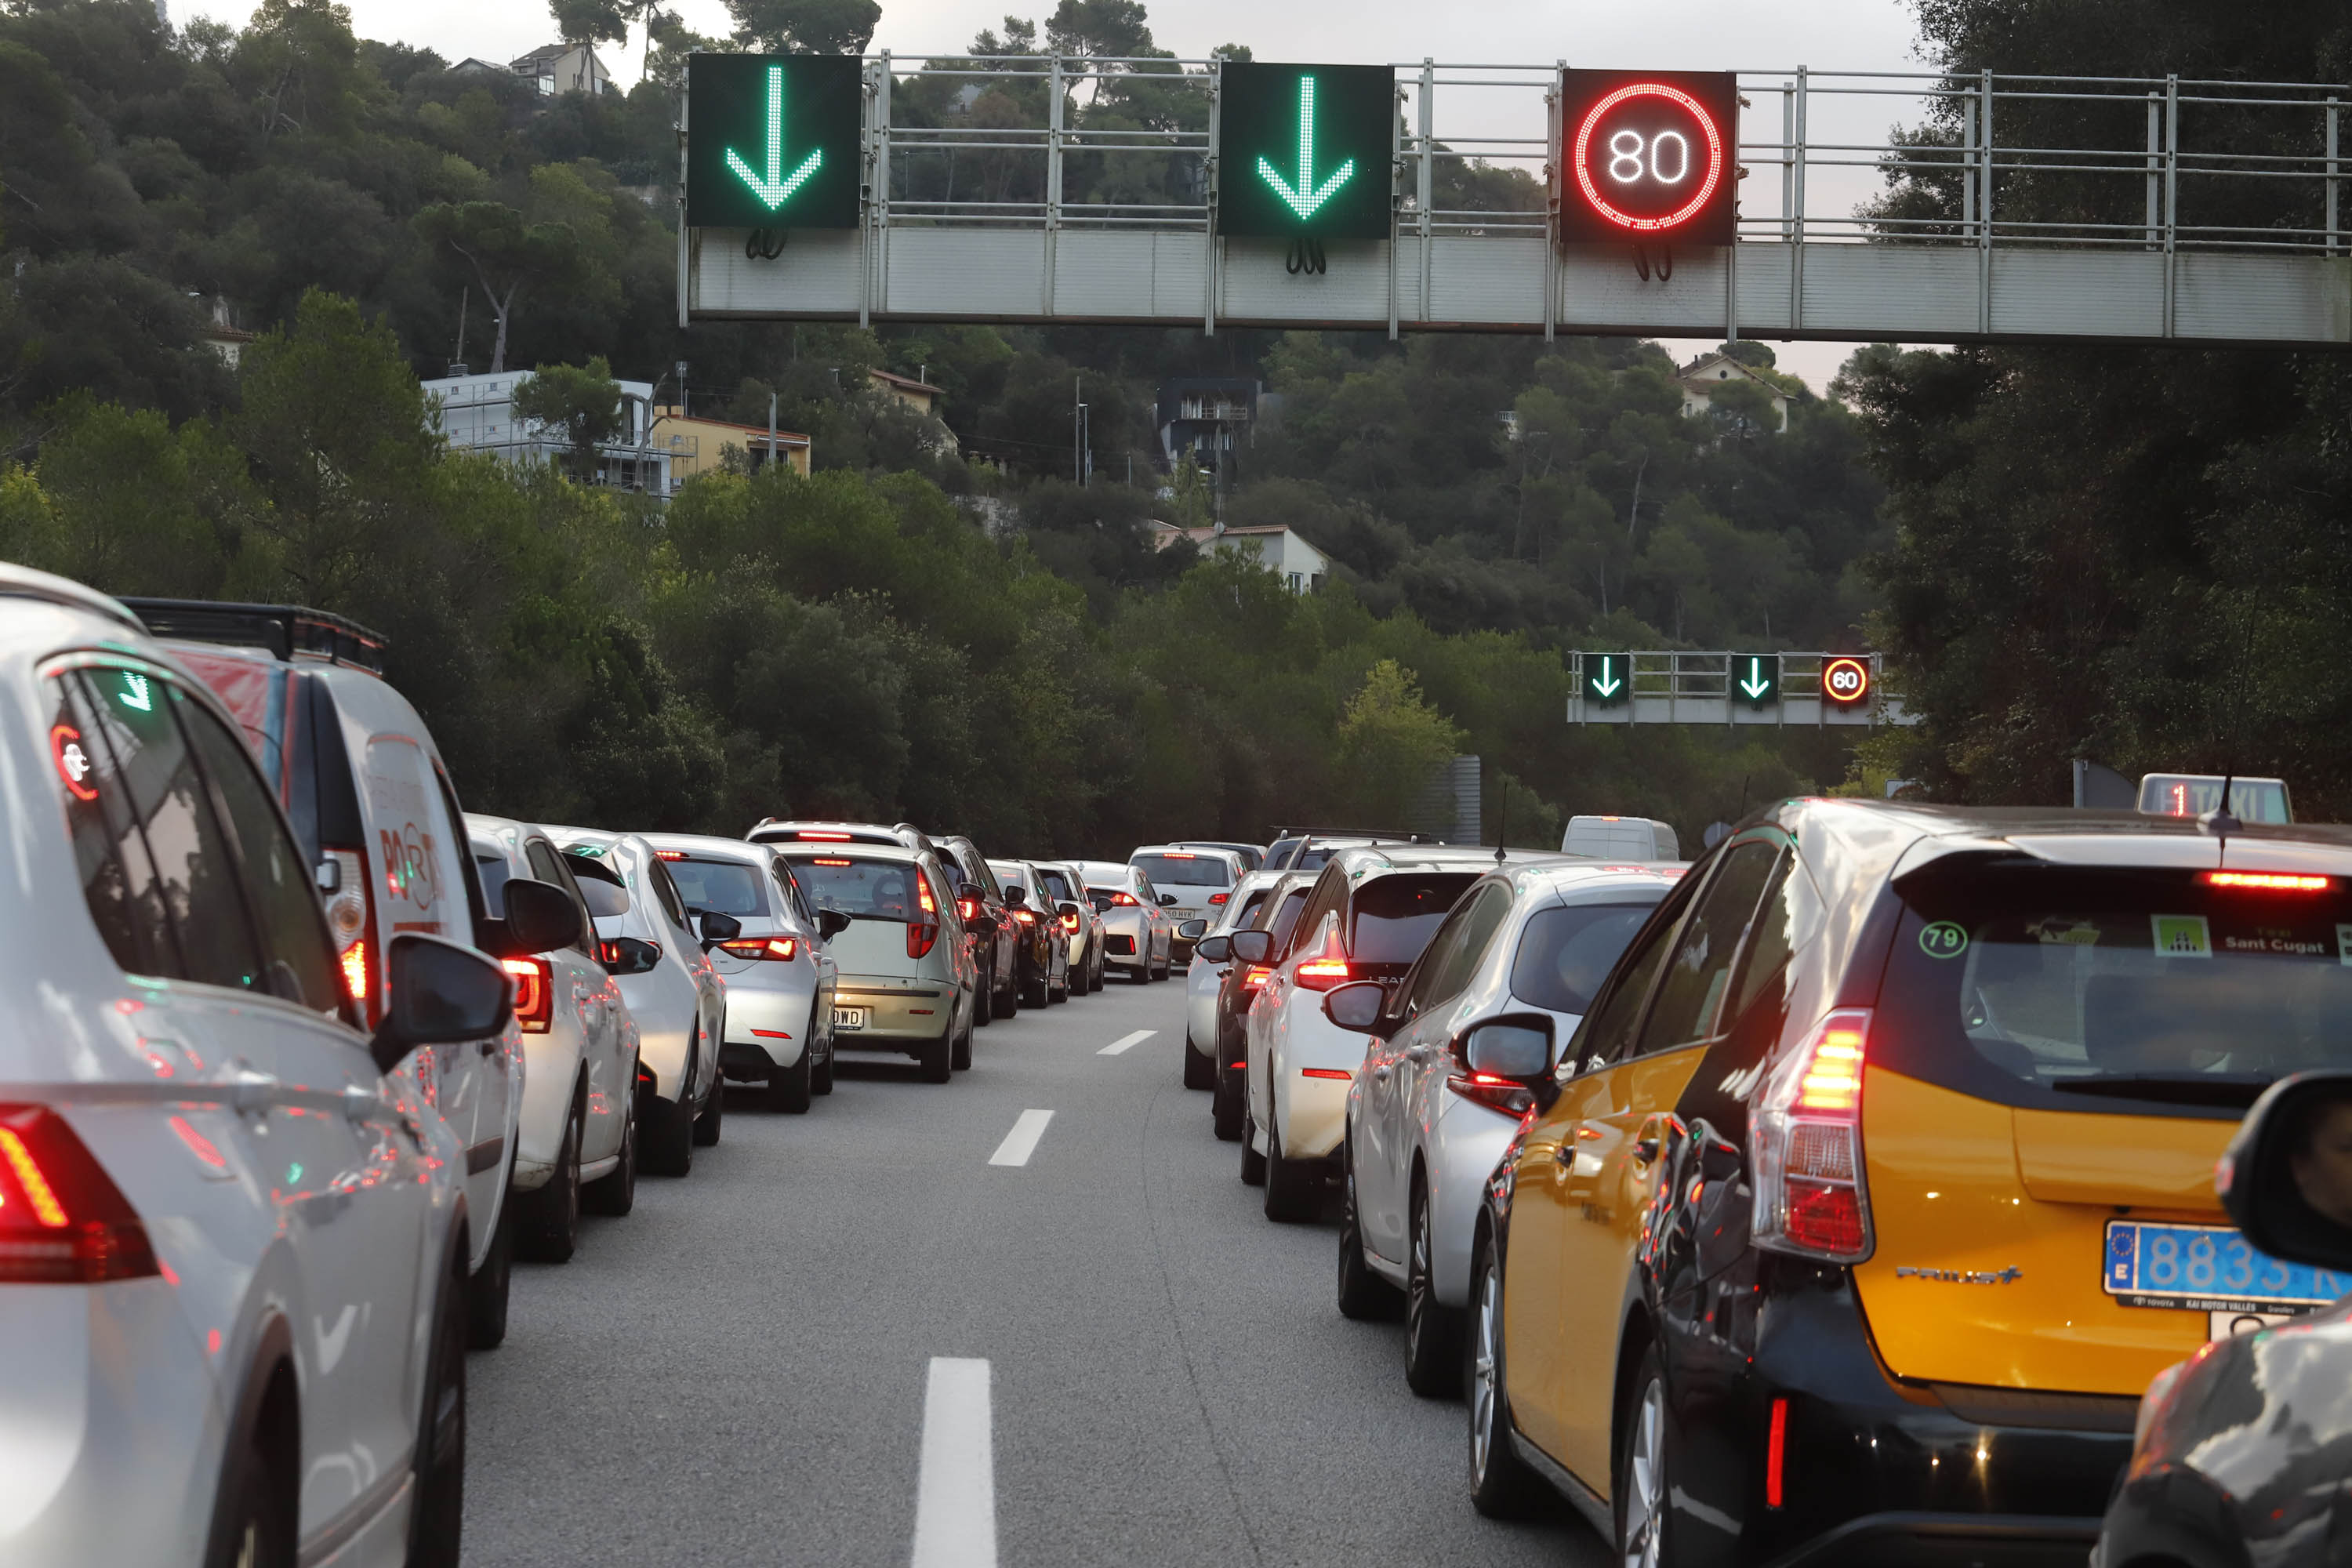 10-14-2021.  Barcelona.  Large traffic queues to enter Barcelona as before the pandemic.  Vallvidrera toll highway.  © Photo: Cristobal Castro.